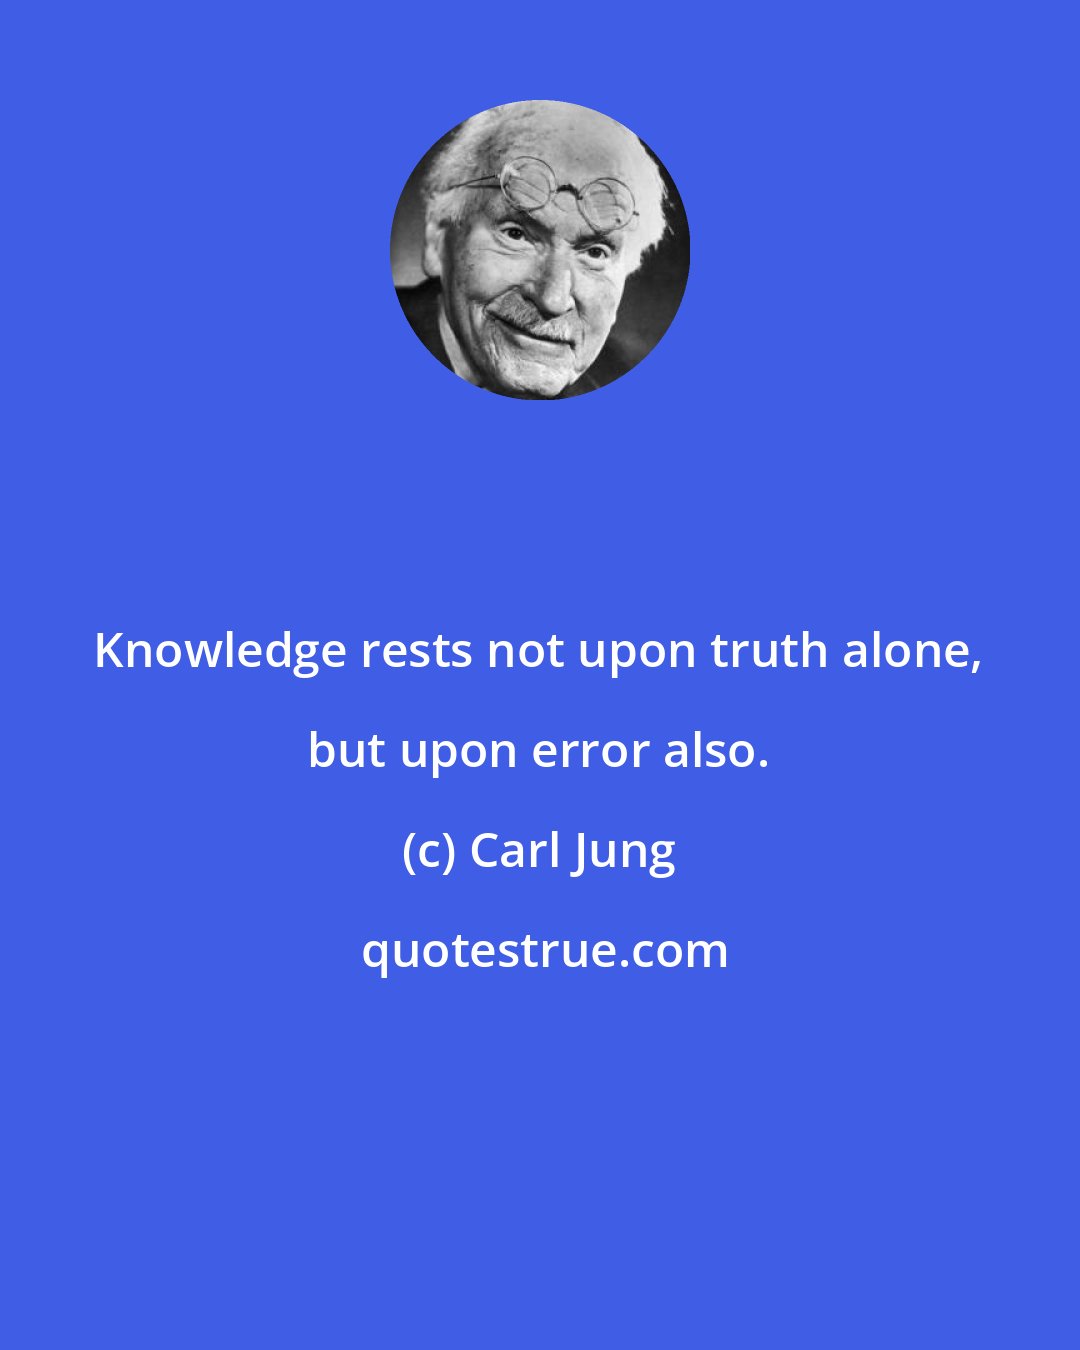 Carl Jung: Knowledge rests not upon truth alone, but upon error also.